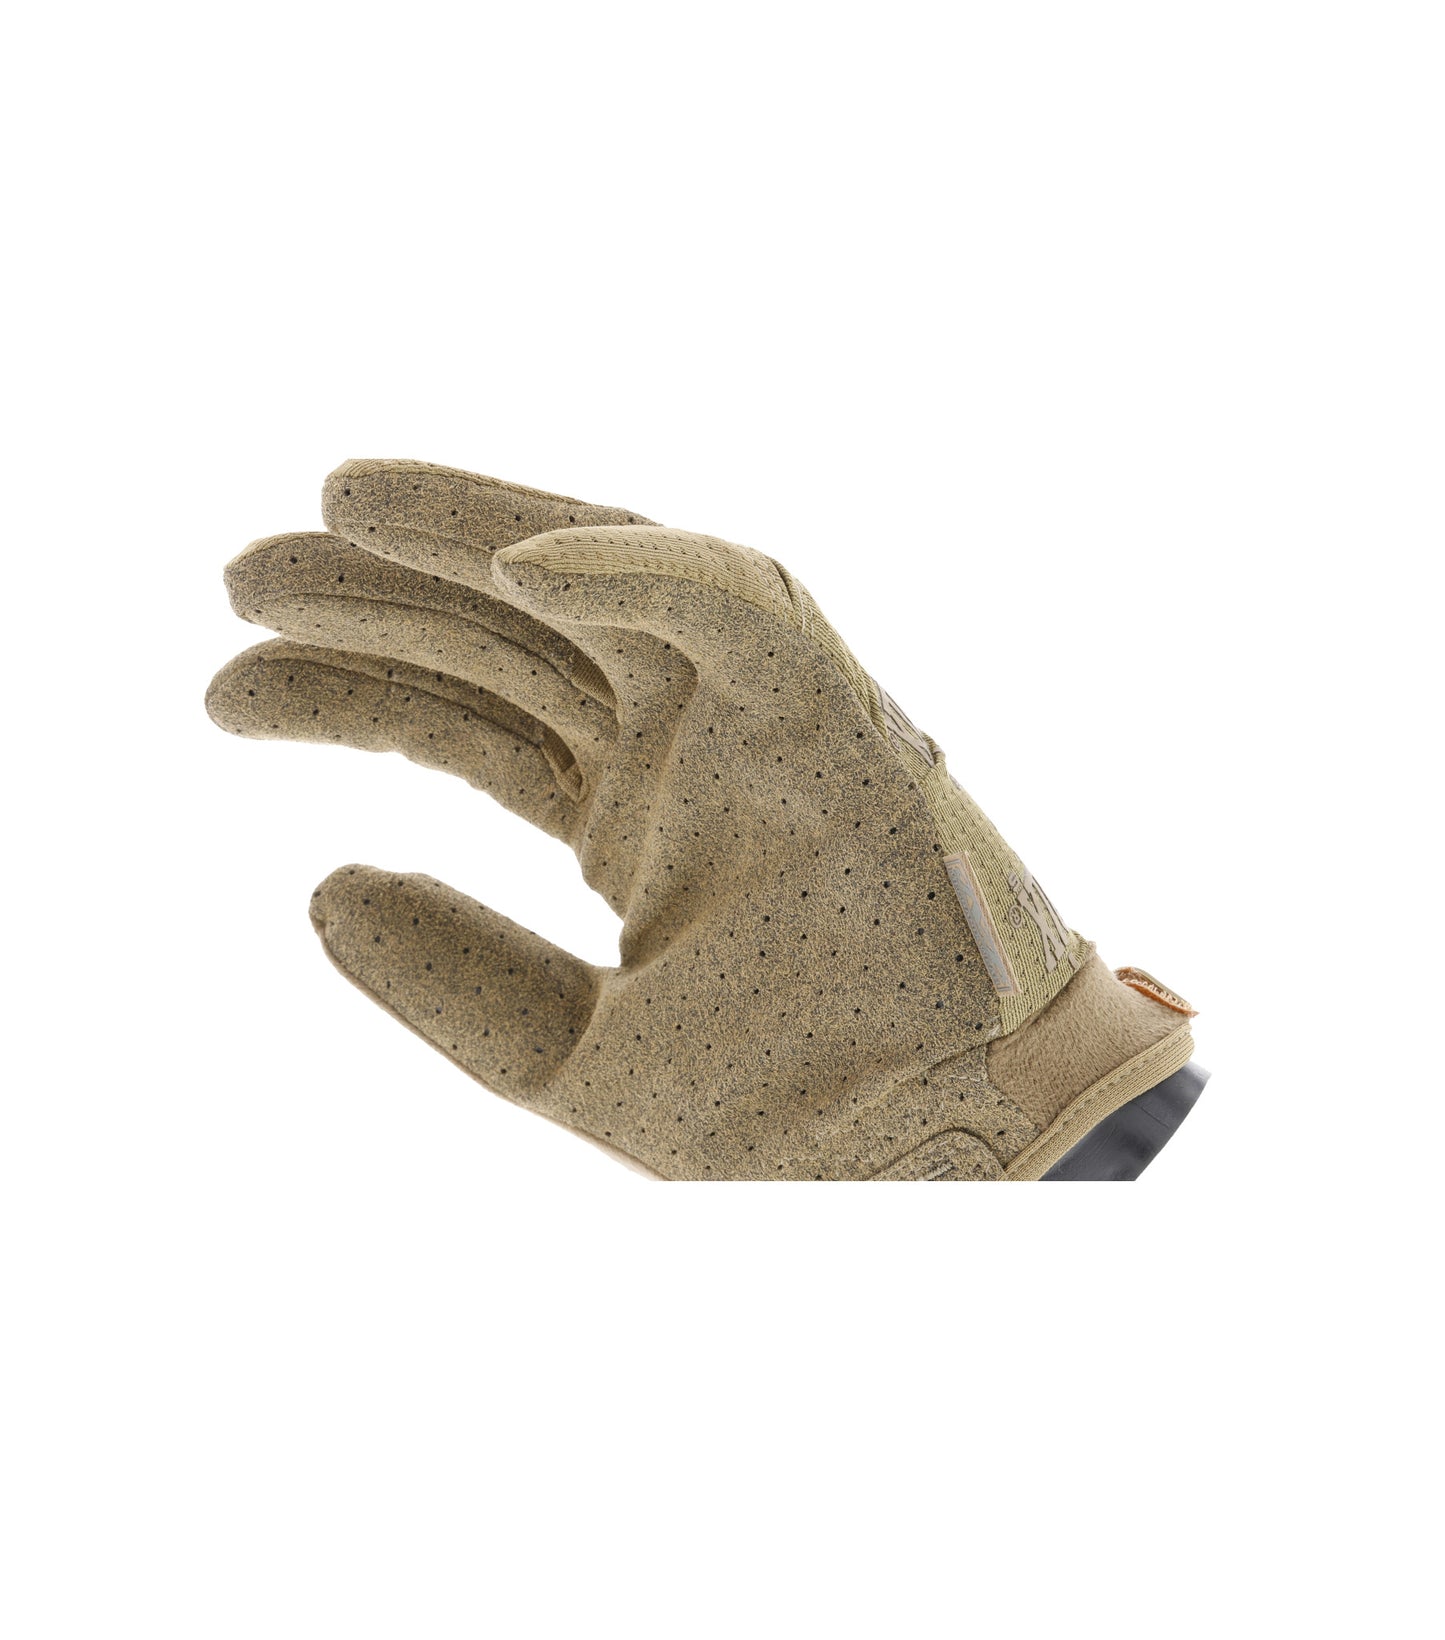 Specialty Vent Coyote Glove